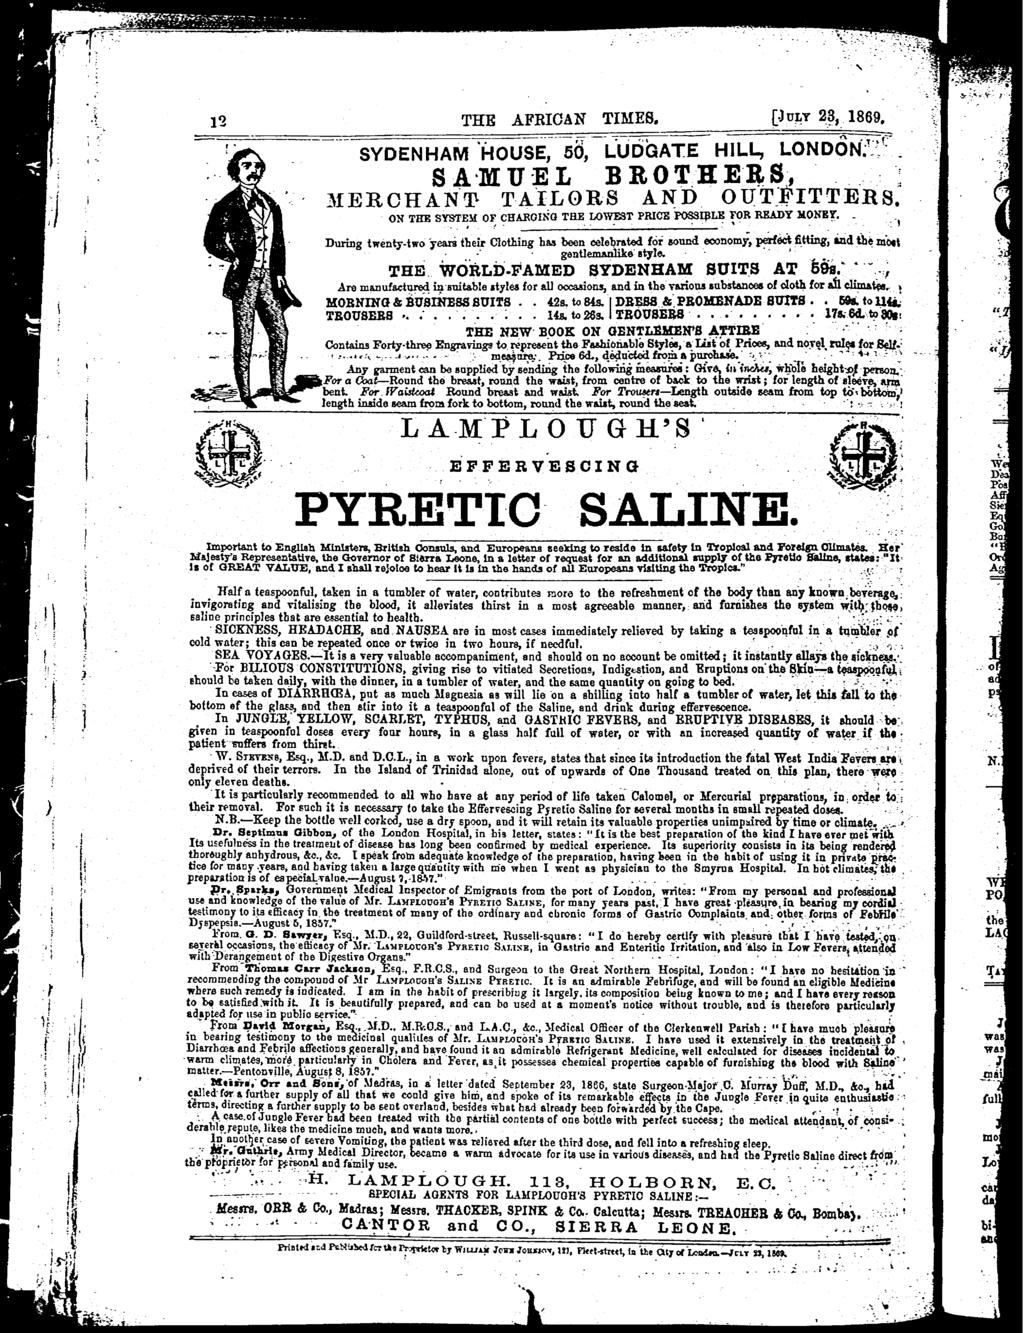 , % 12 THE AFRICAN TIMES C )ULY 23, 1869 ~:< SYDENHAM "HousE, 5 J, LUDGATE HILL, LOND r > "" " EFFERVESCING~~_, PYRETIO SALINE Imporan o ~En~ll~h Mlnlser~ :Brllah Commls, and Europeans seemn8 o resde